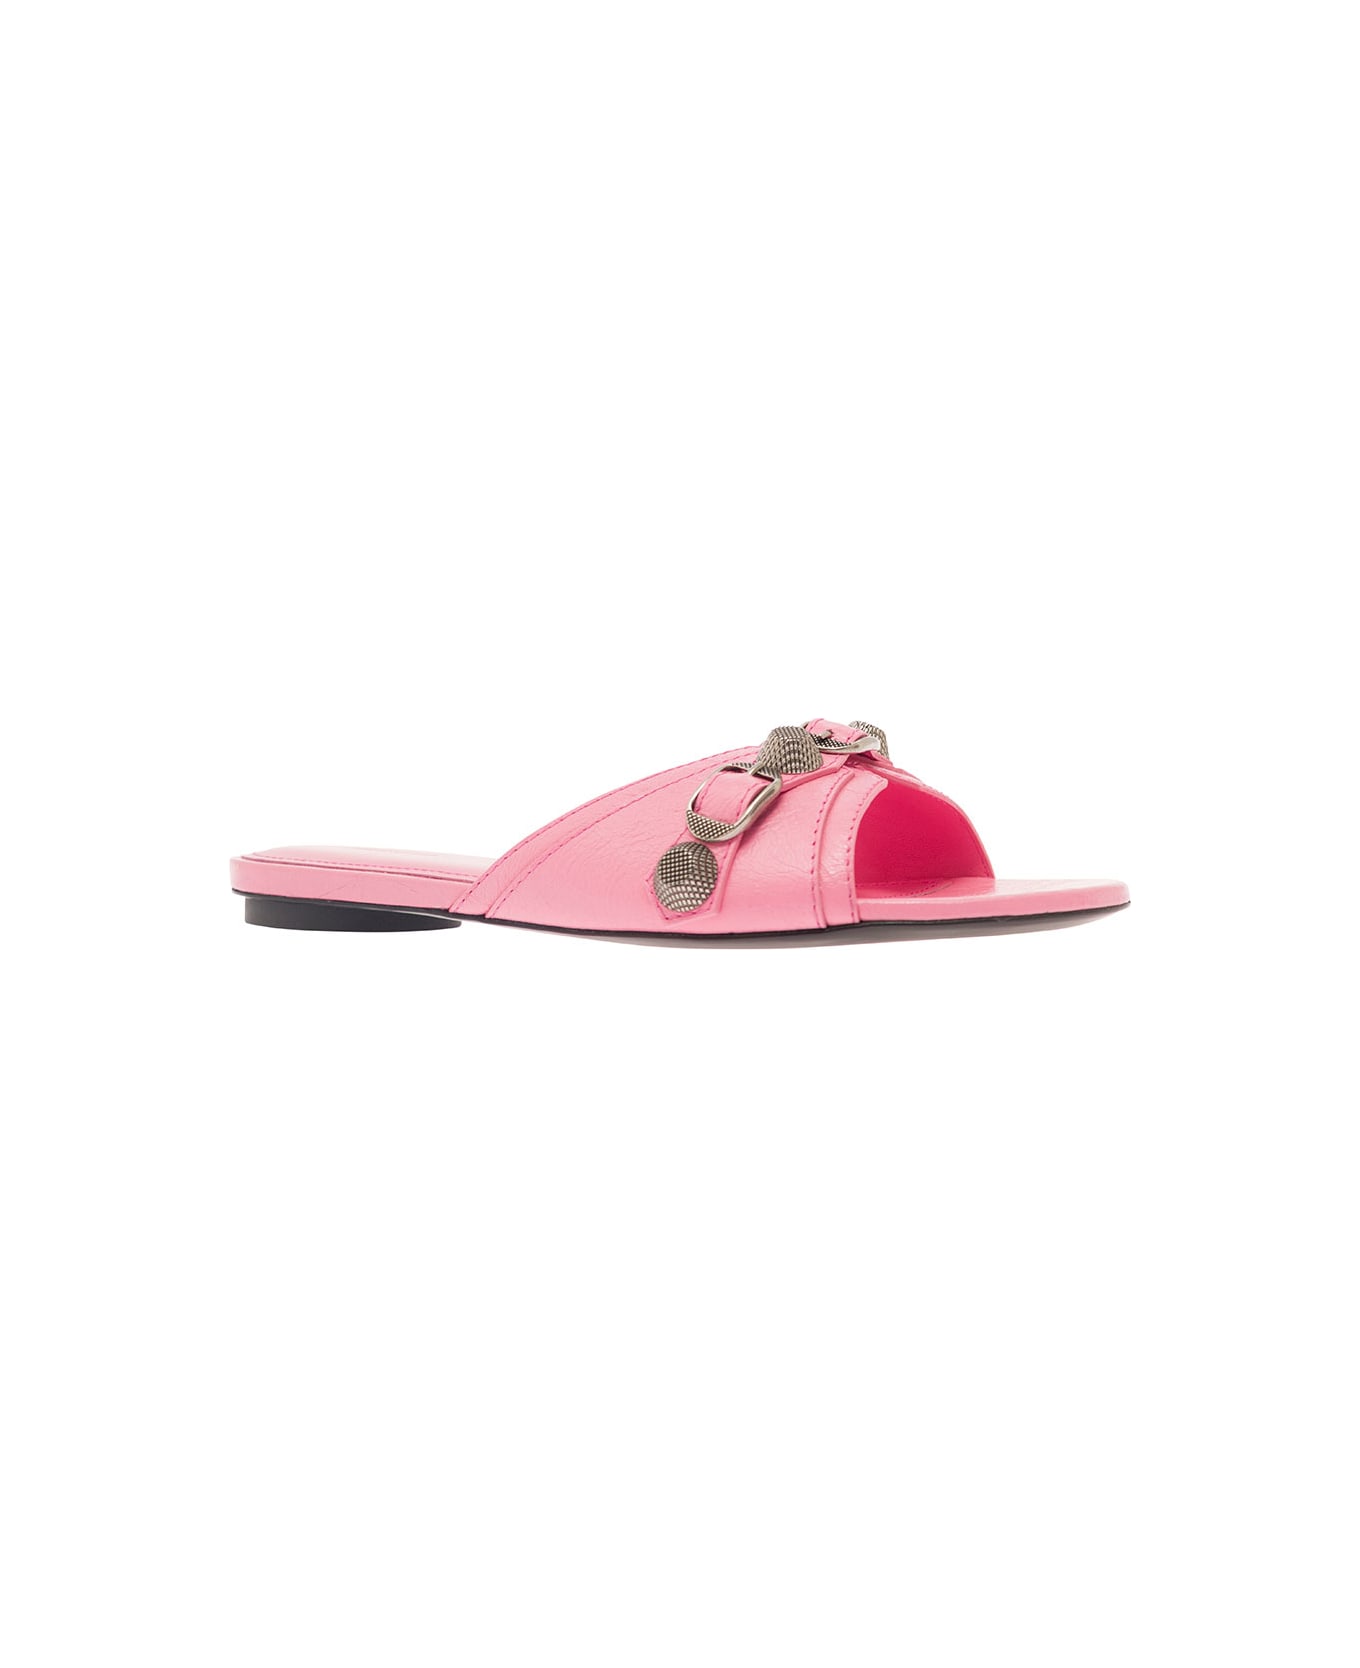 Balenciaga 'cagole' Pink Sandals With Studs And Buckles In Smooth Leather Woman - Pink